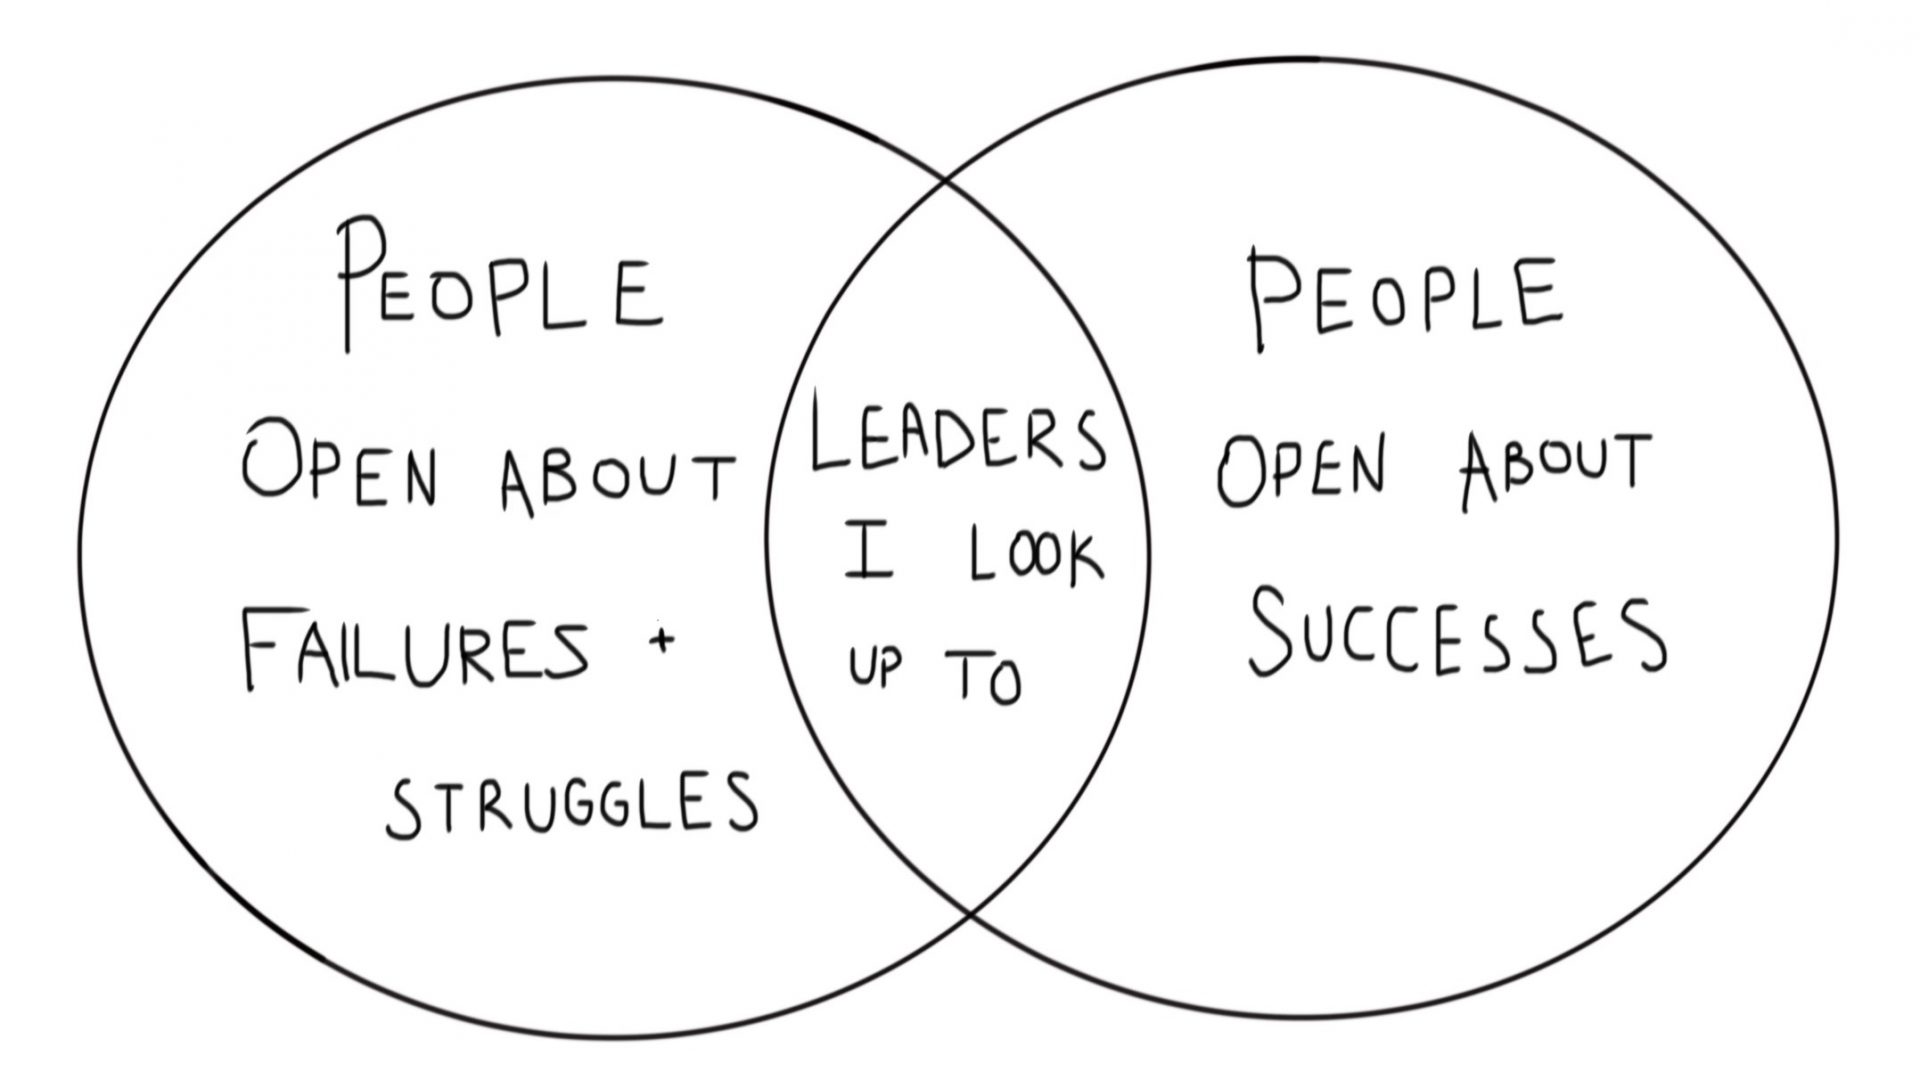 venn diagram: left circle - people open about failures and struggles, right - people open about successes, middle overlap - leaders I look up to